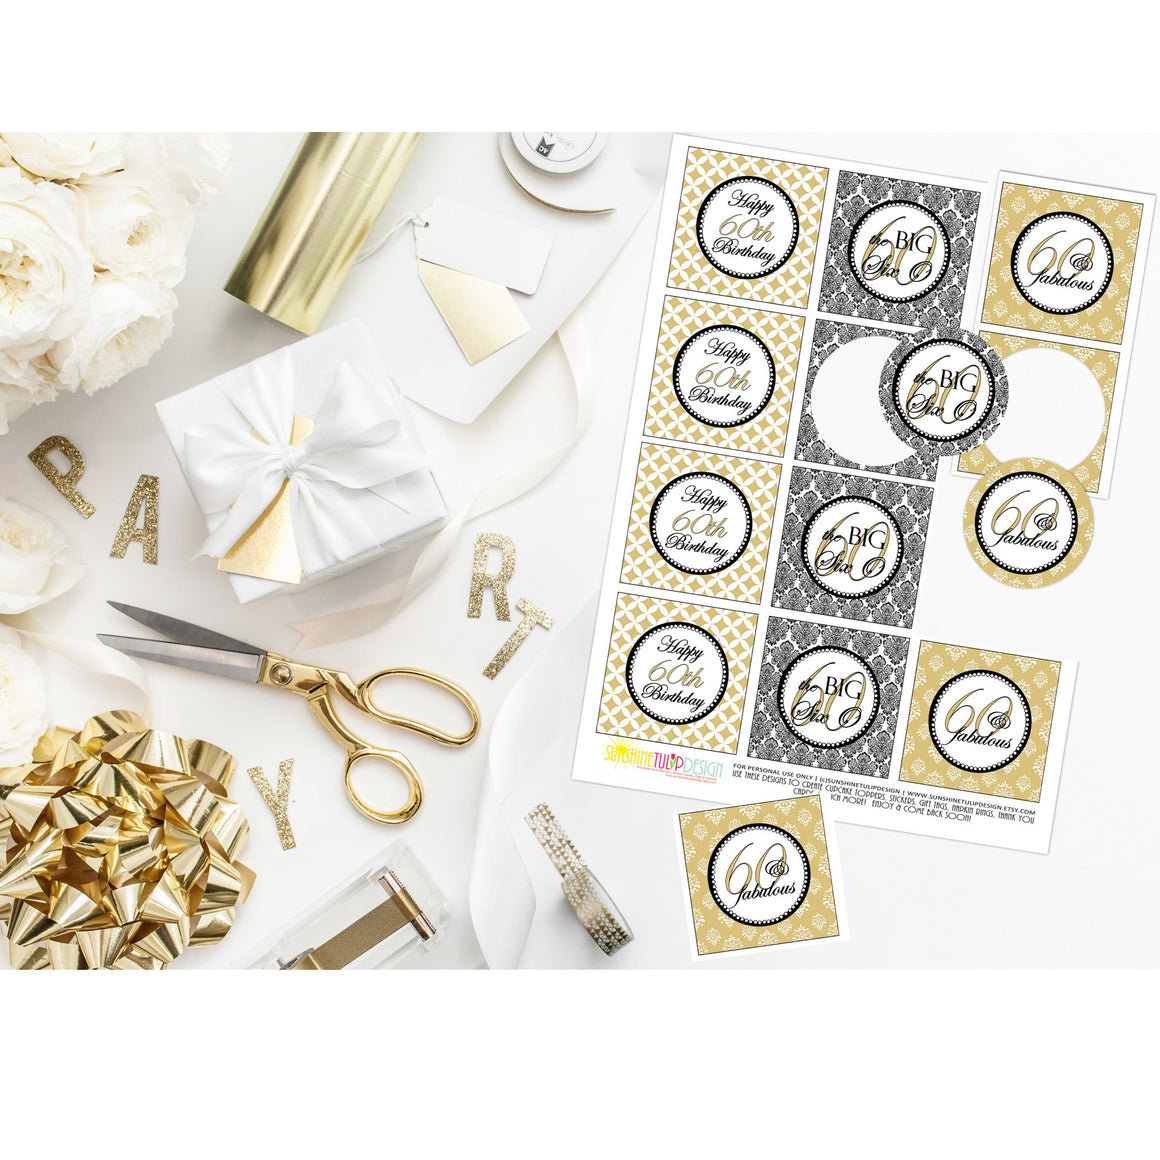 Printable 60th Birthday Gold Cupcake Toppers, Sticker Labels & Party Favor Tags by Sunshinetulipdesign - Sunshinetulipdesign - 1